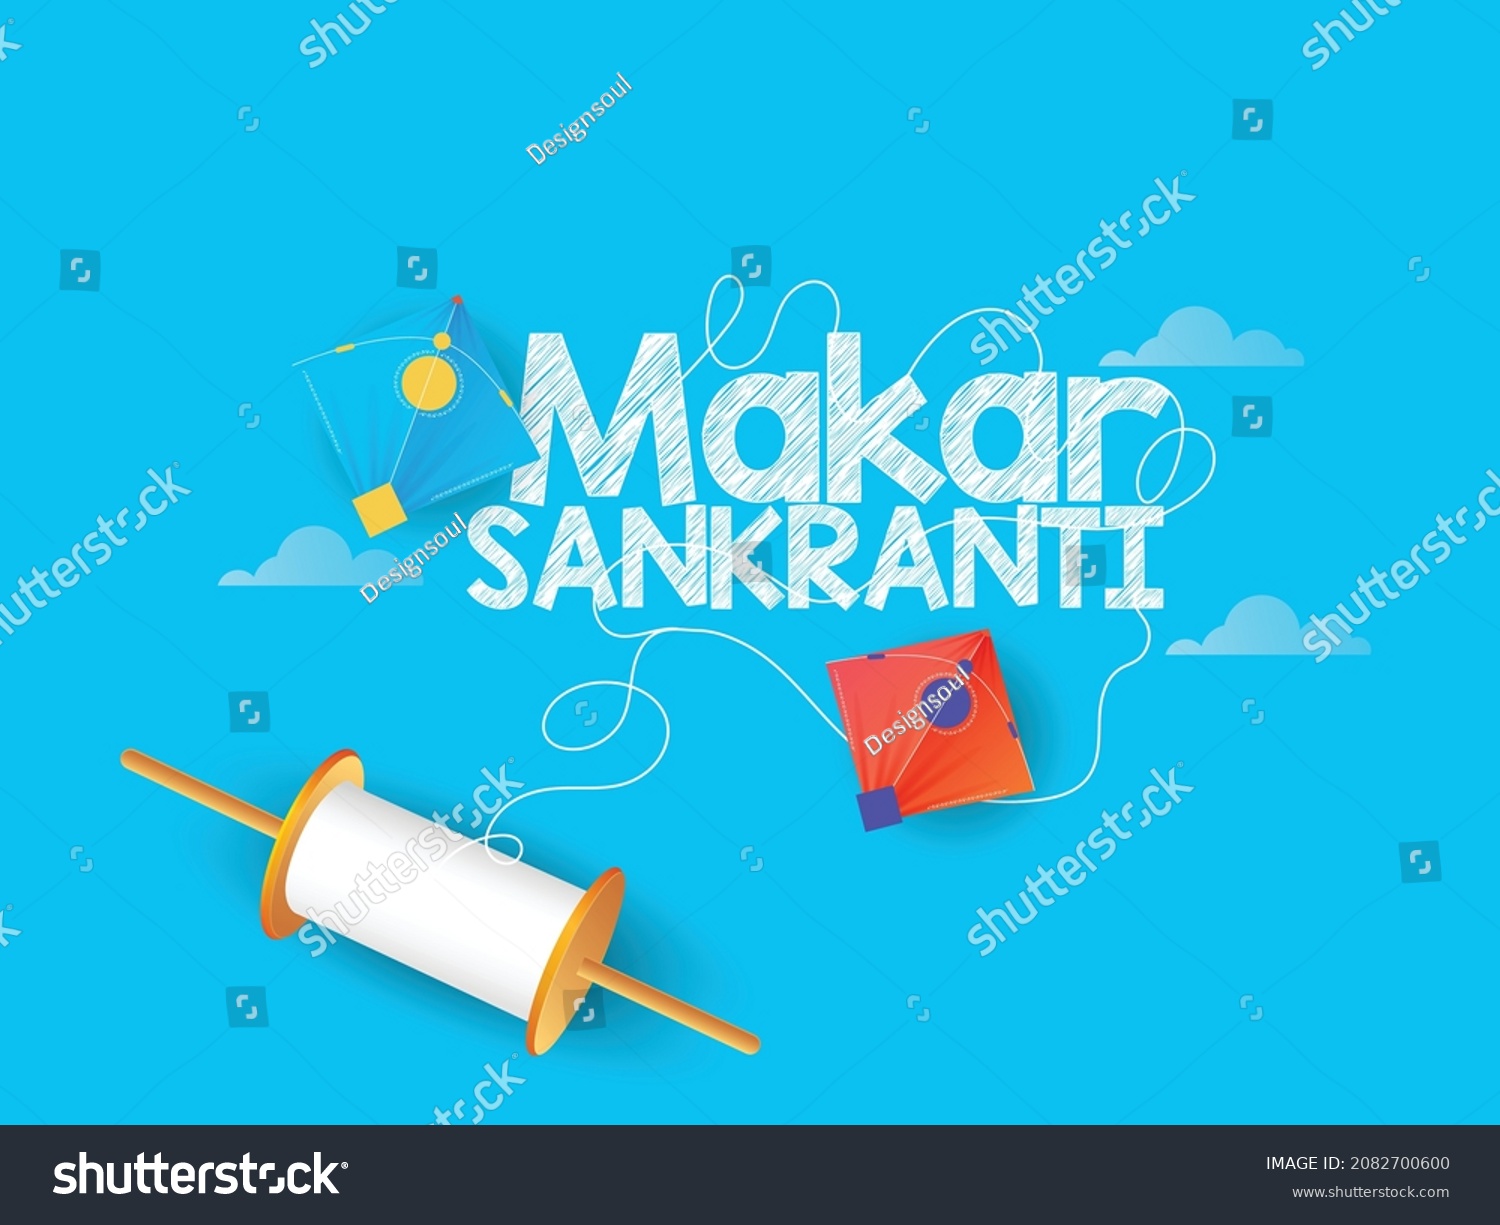 SVG of Happy Makar Sankranti With Realistic Flying Colorful Kites And String Spools On White Background For Makar Sankranti Festival. svg